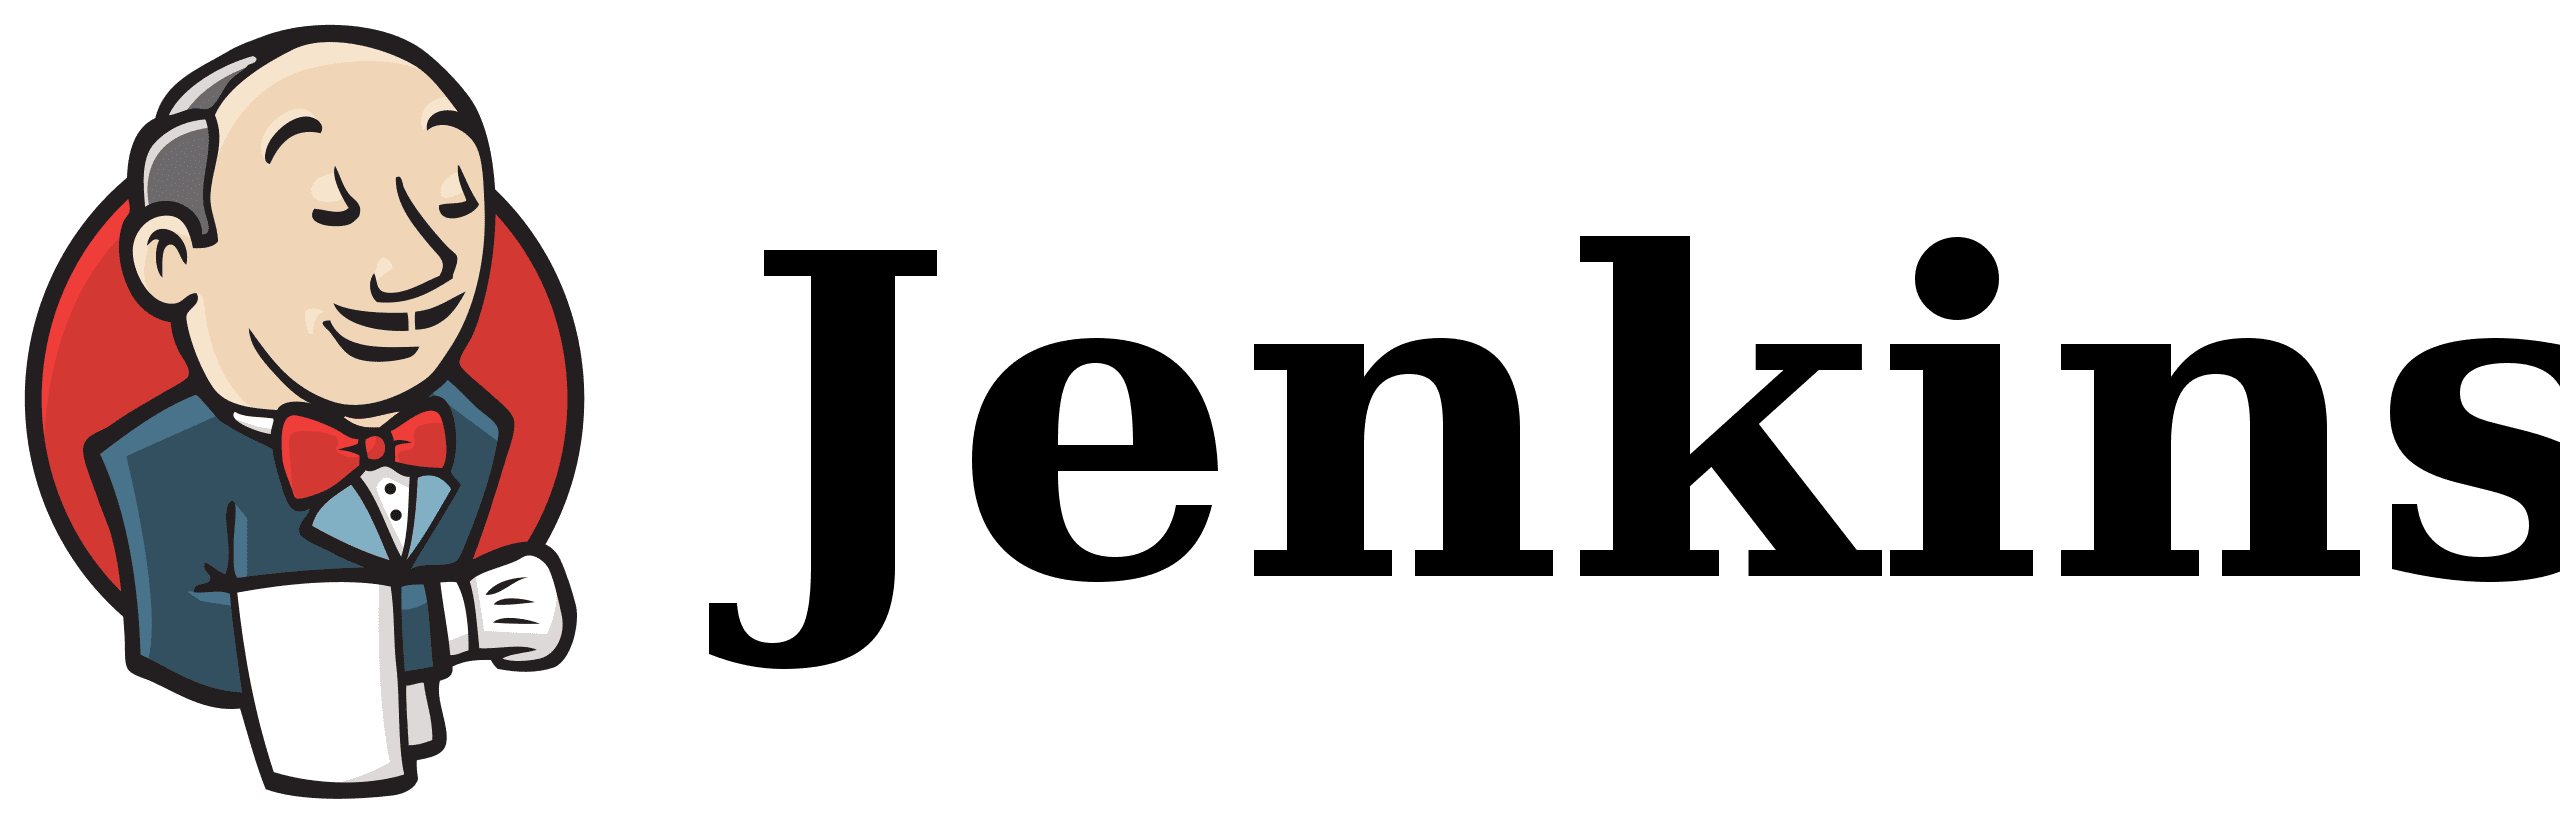 Jenkins logo with title.svg